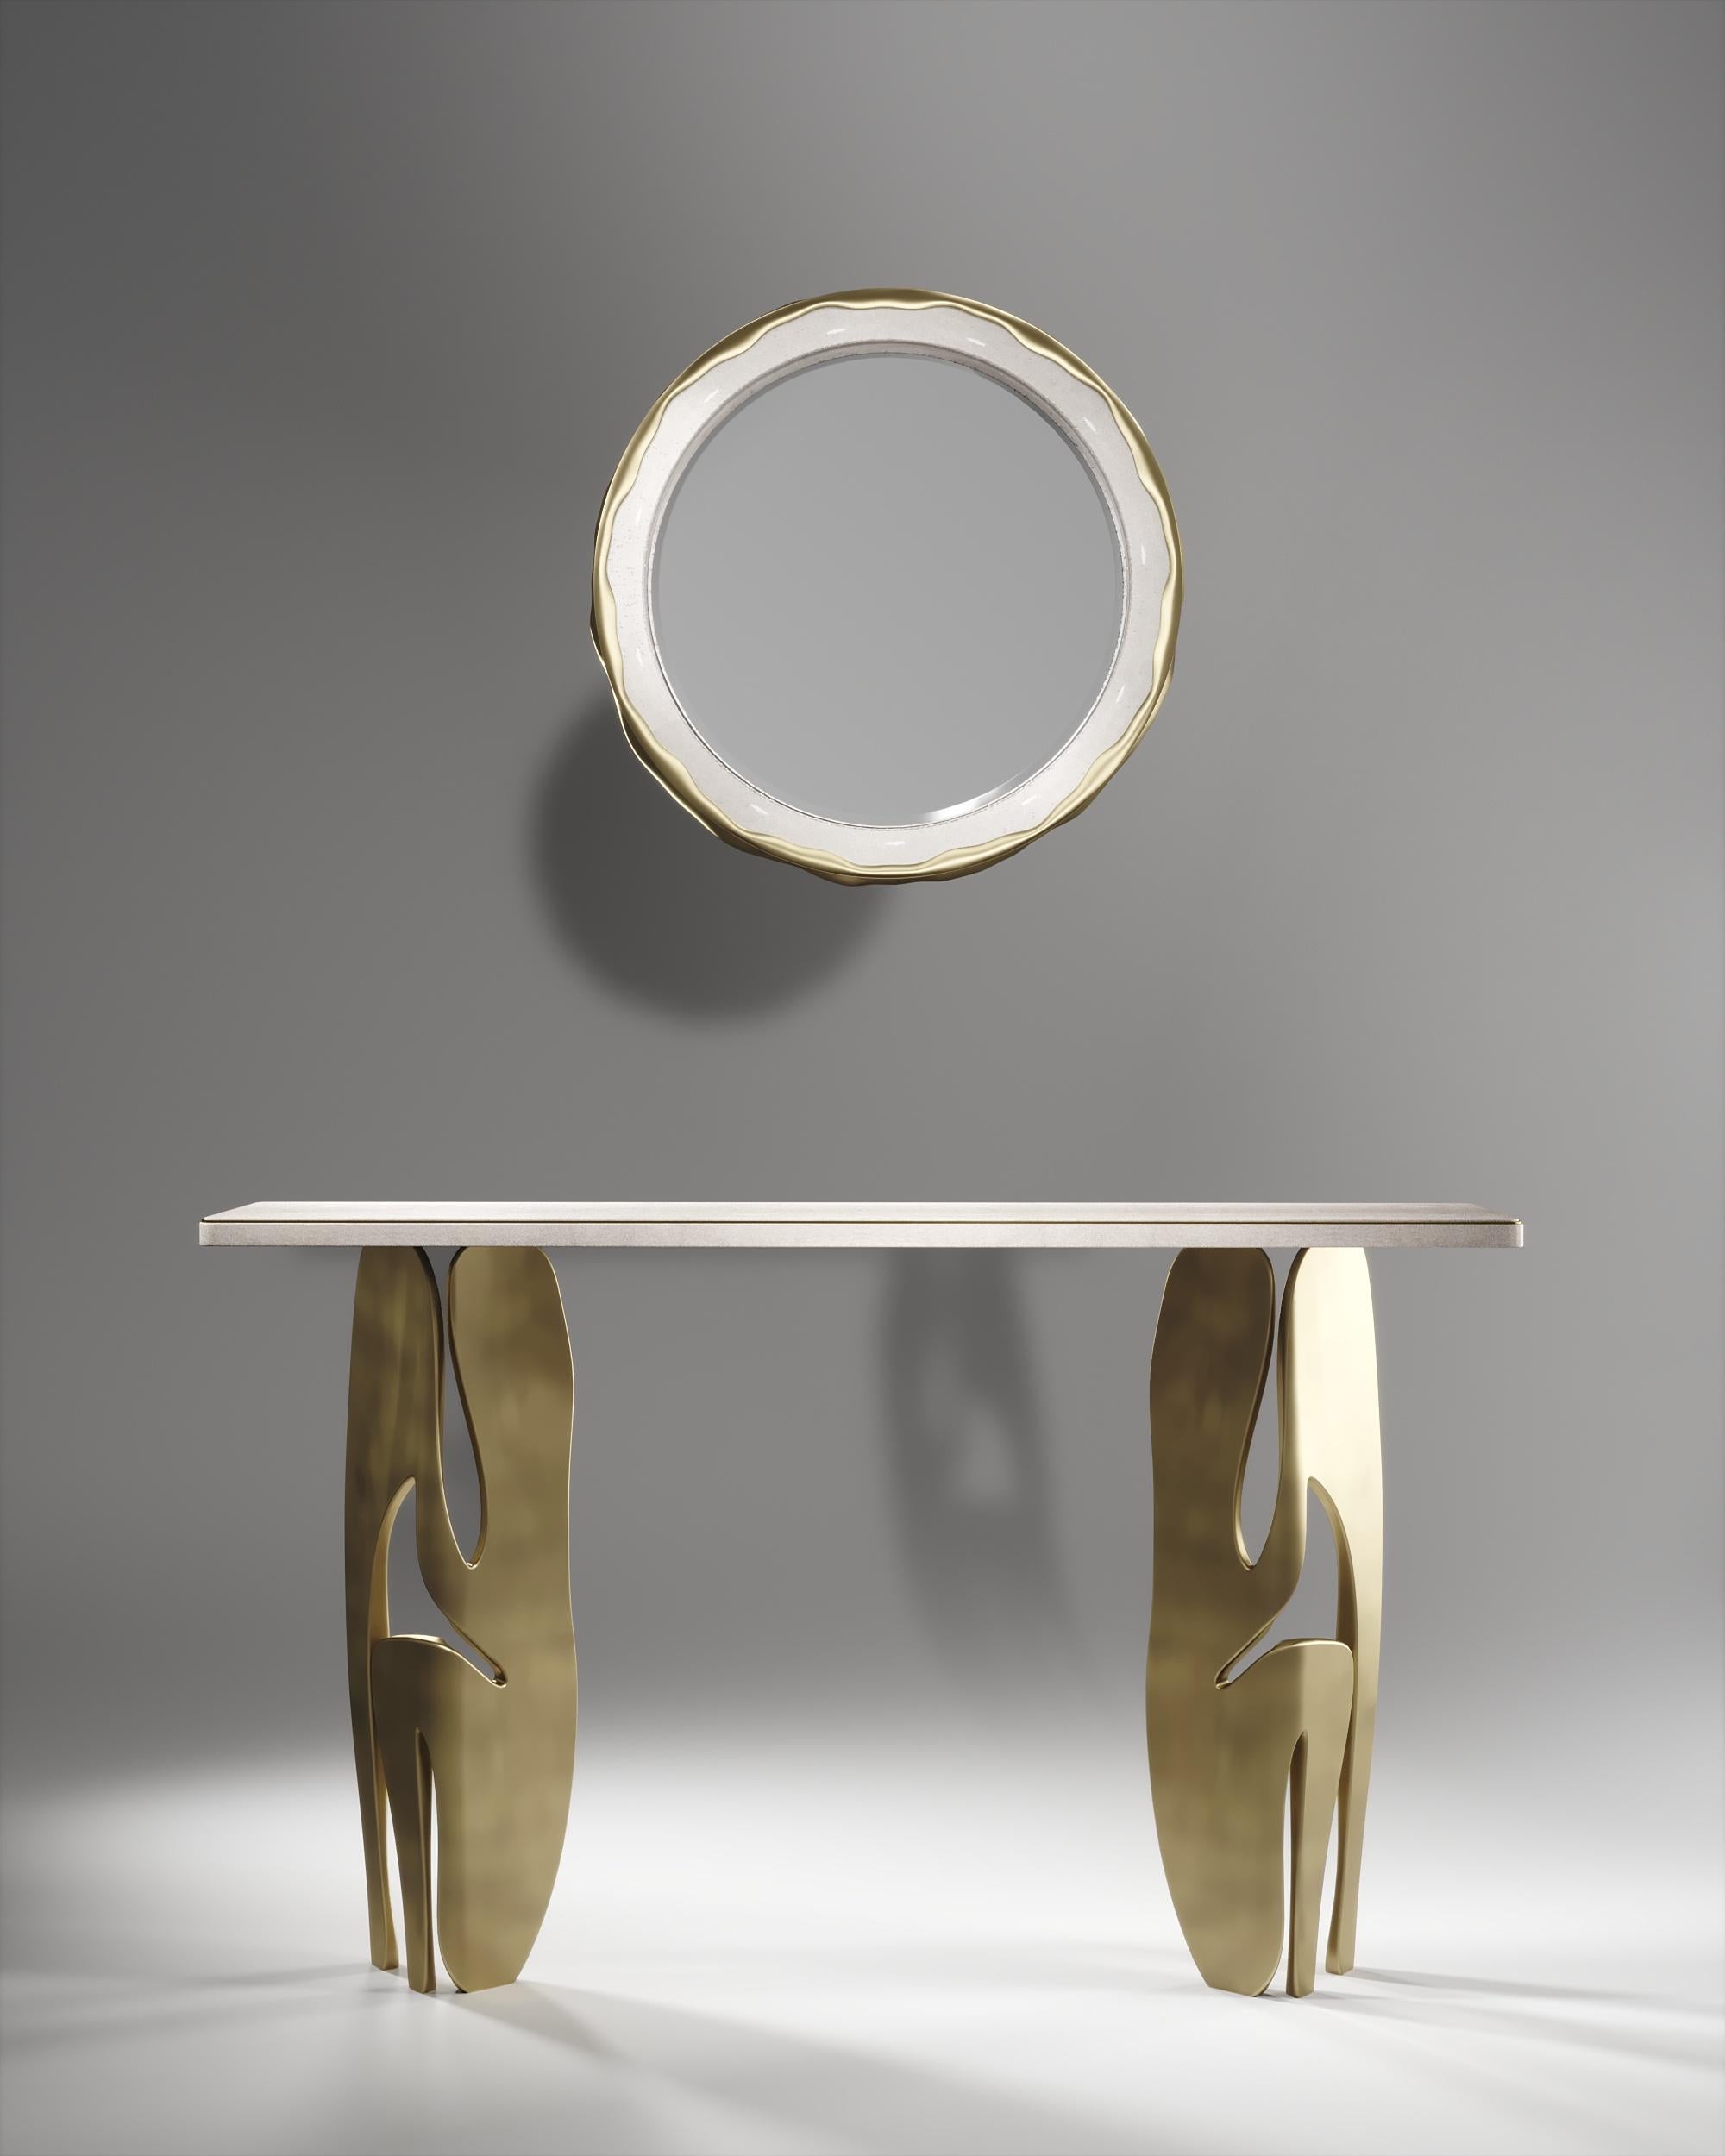 The melting mirror by R&Y Augousti in cream shagreen and bronze-patina brass, is an iconic piece of theirs with their signature 